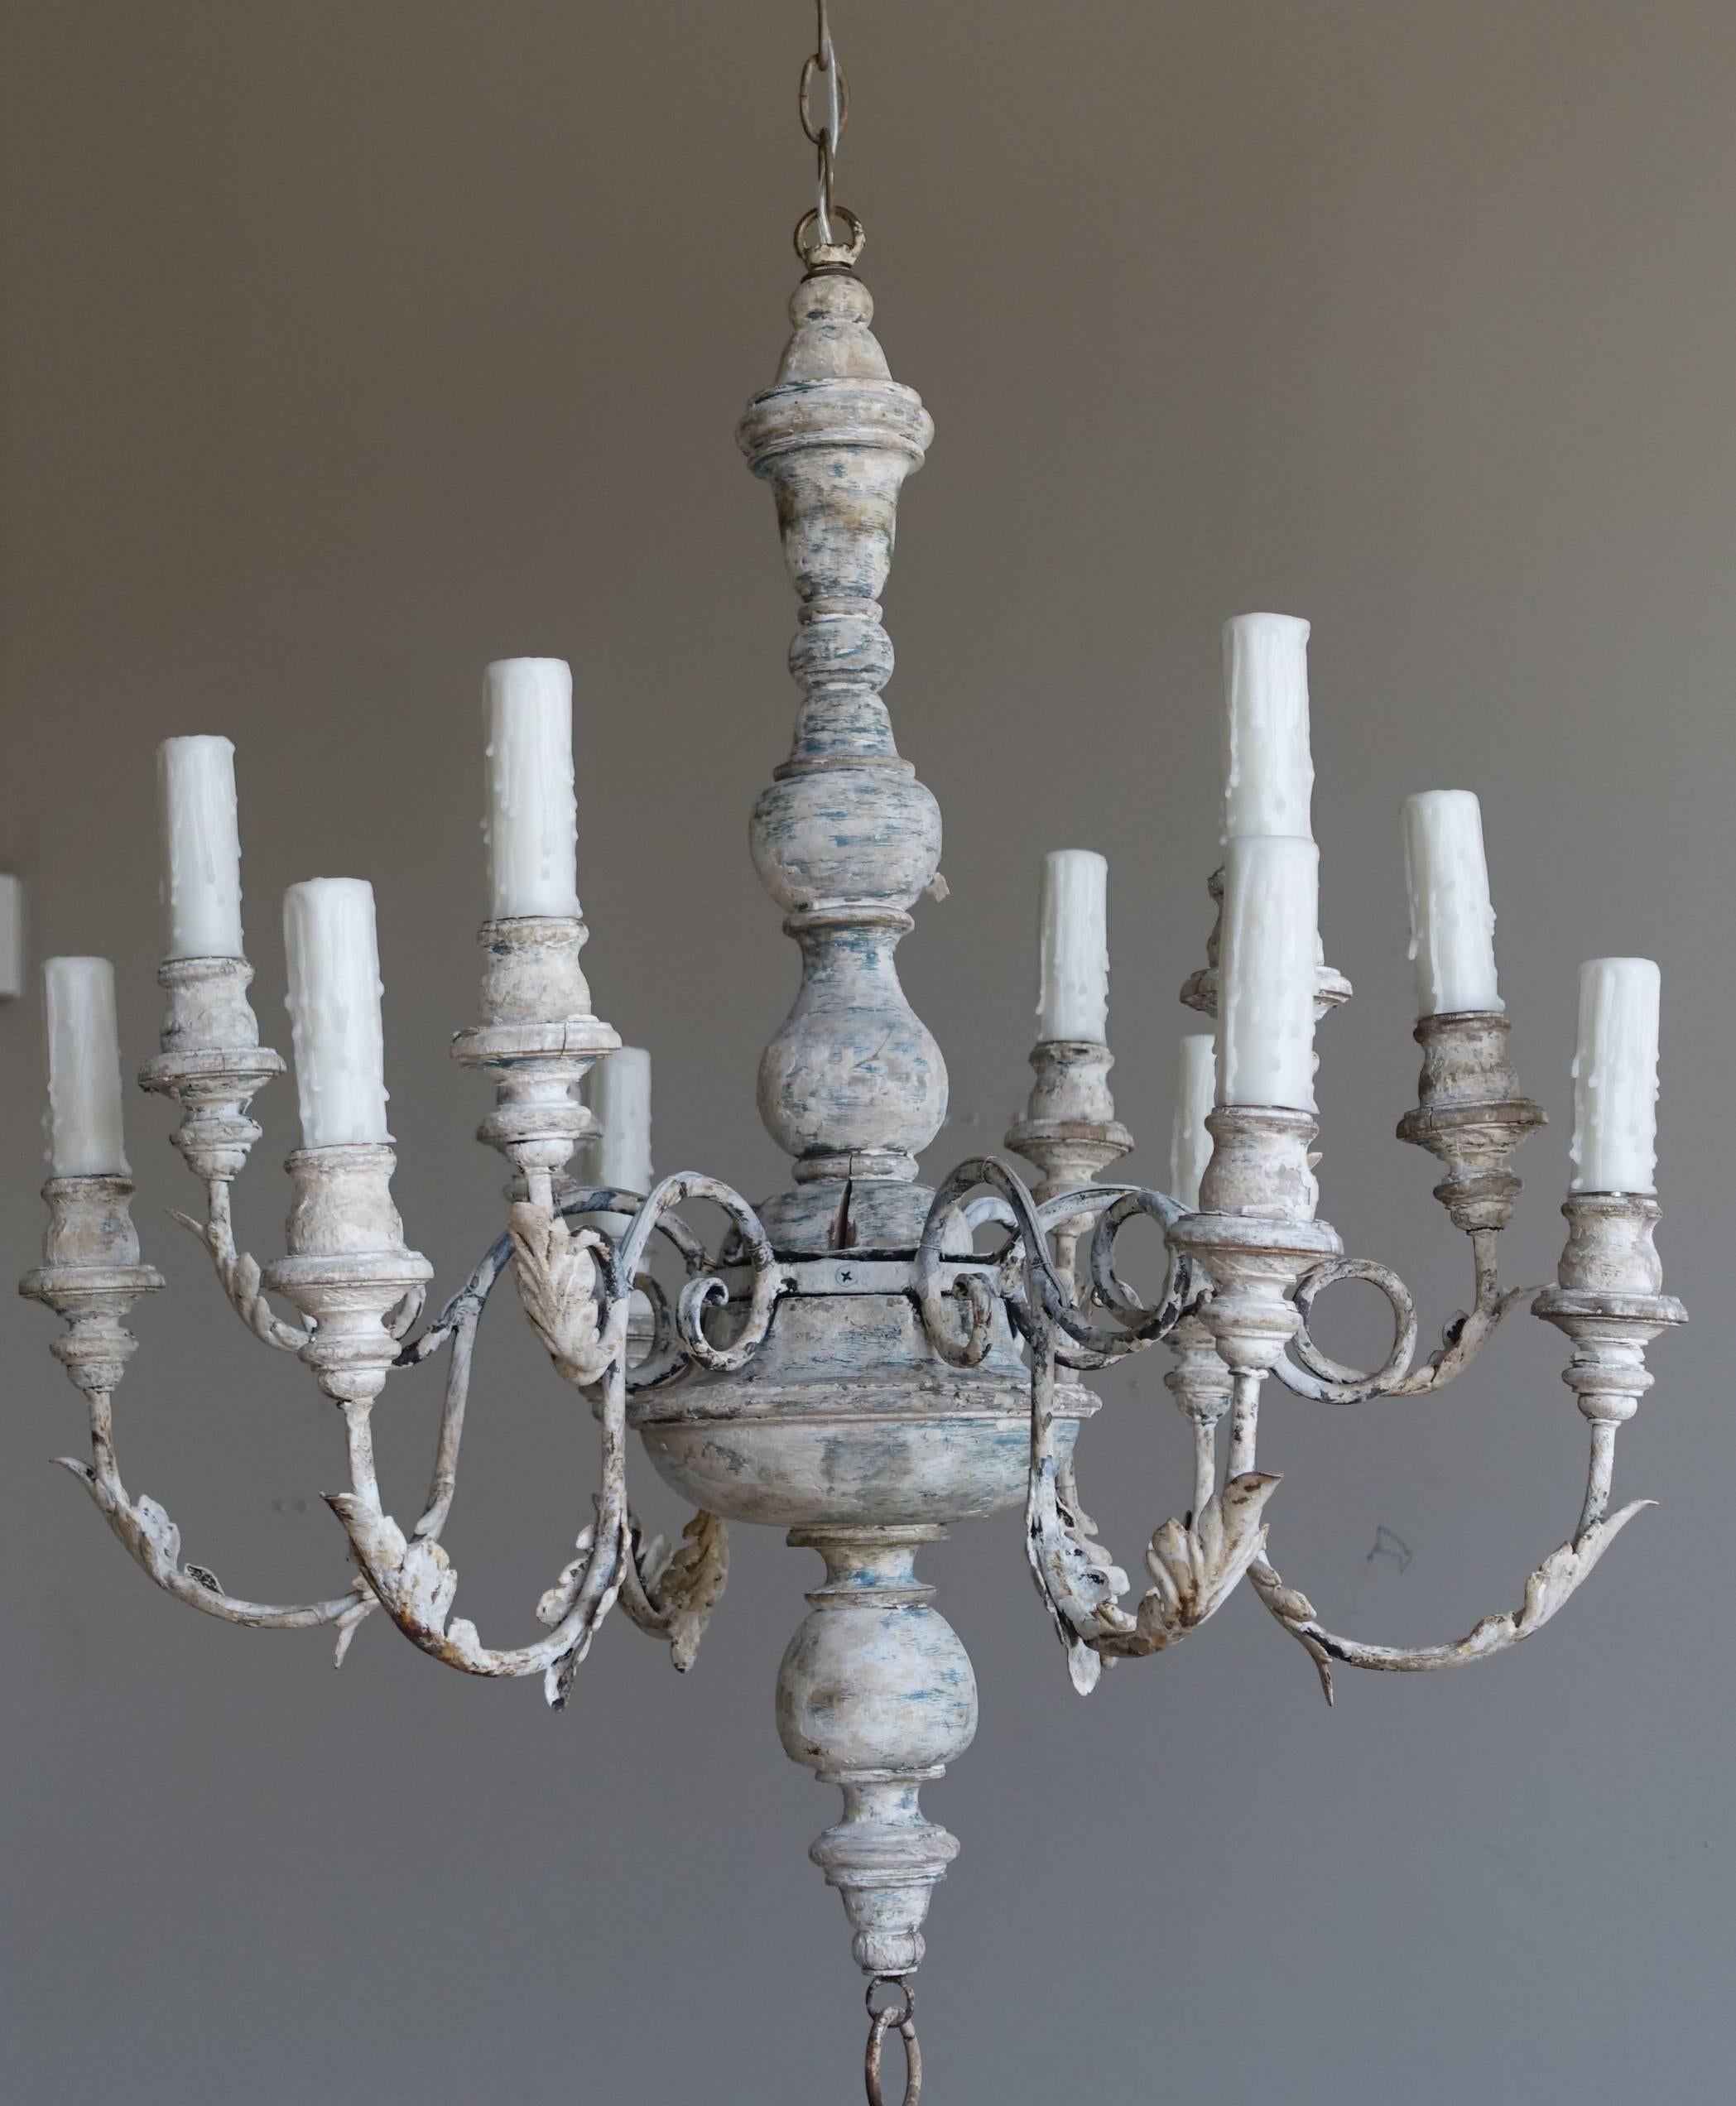 Italian twelve-light wood and iron chandelier newly wired with drip wax cream candle covers. Chandelier includes 40